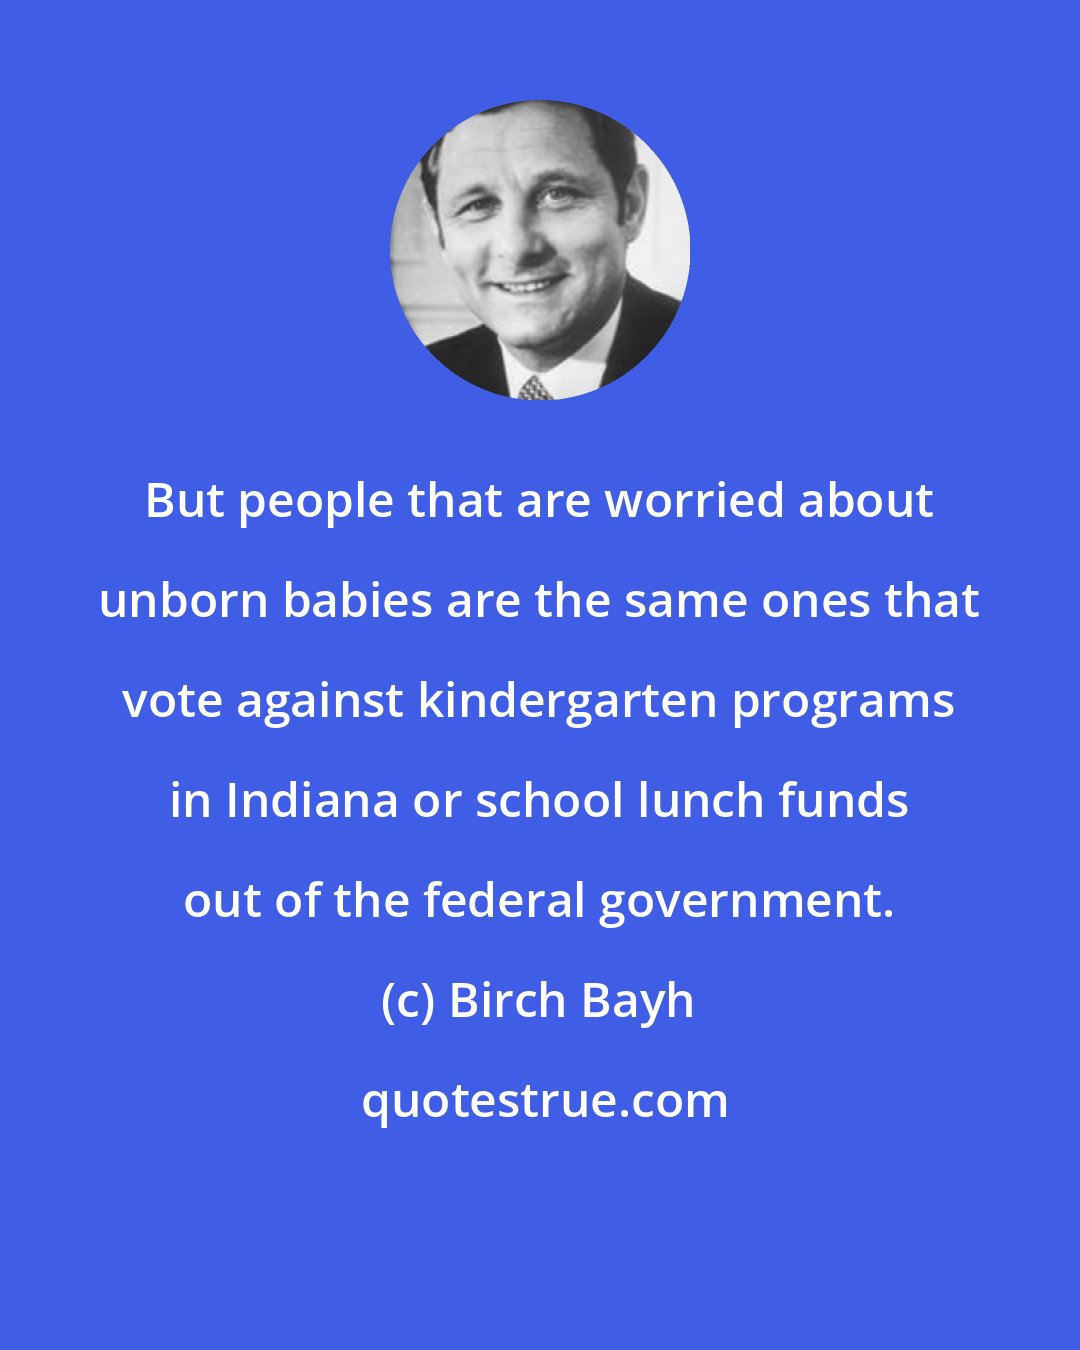 Birch Bayh: But people that are worried about unborn babies are the same ones that vote against kindergarten programs in Indiana or school lunch funds out of the federal government.